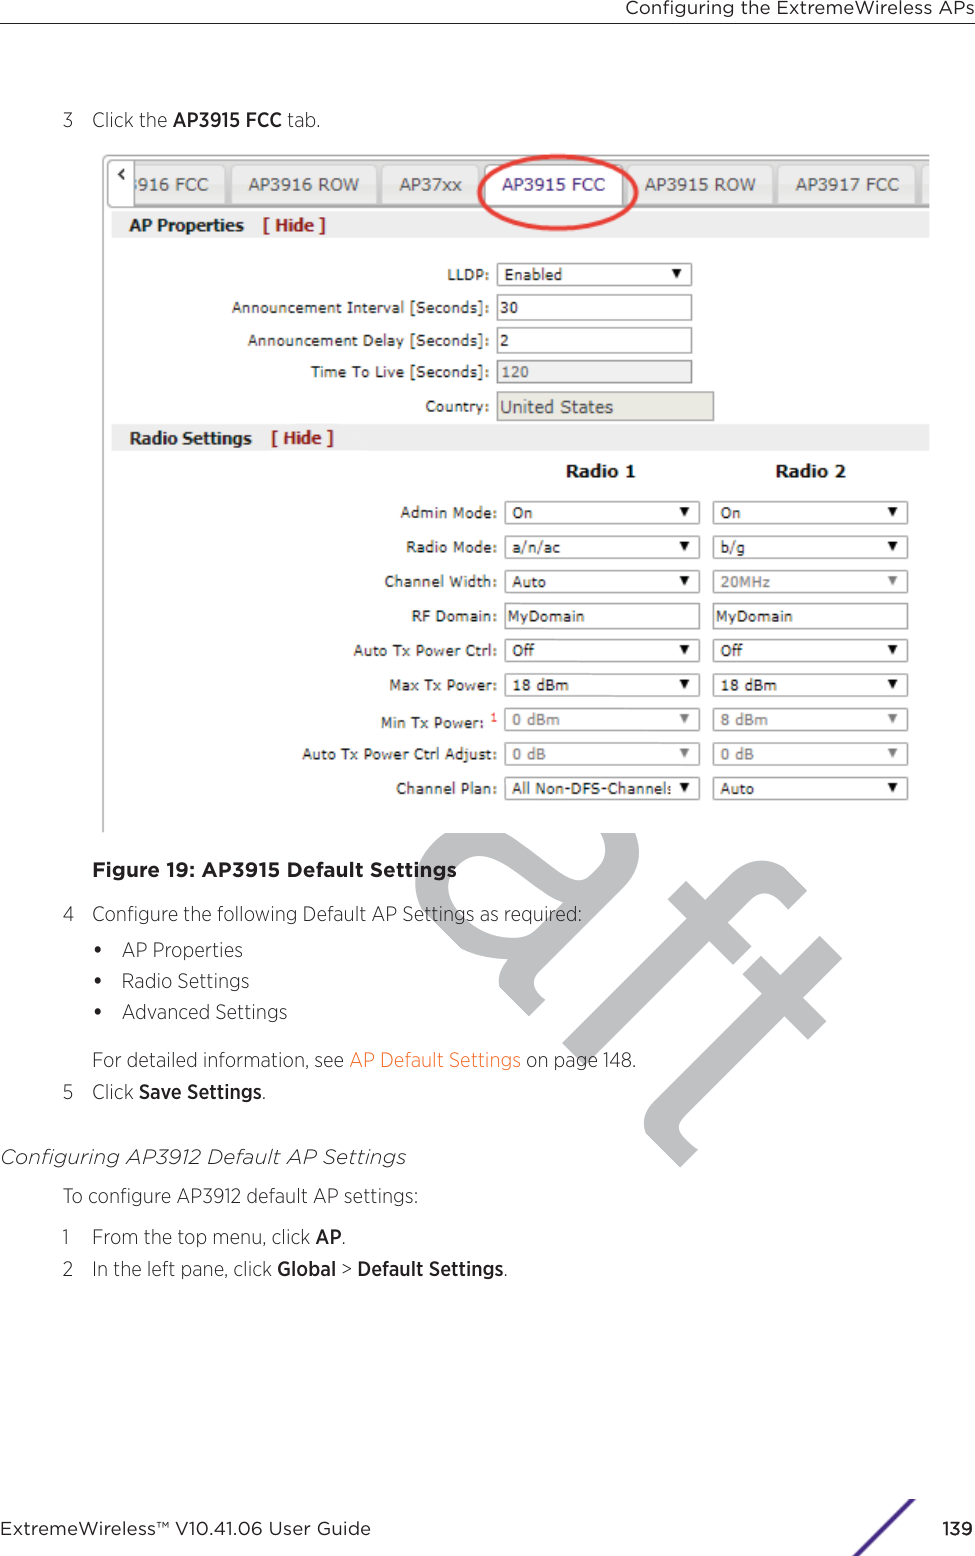 raft3 Click the AP3915 FCC tab.Figure 19: AP3915 Default Settings4 Conﬁgure the following Default AP Settings as required:•AP Properties•Radio Settings•Advanced SettingsFor detailed information, see AP Default Settings on page 148.5 Click Save Settings.Conﬁguring AP3912 Default AP SettingsTo conﬁgure AP3912 default AP settings:1 From the top menu, click AP.2 In the left pane, click Global &gt; Default Settings.Conﬁguring the ExtremeWireless APsExtremeWireless™ V10.41.06 User Guide 1139